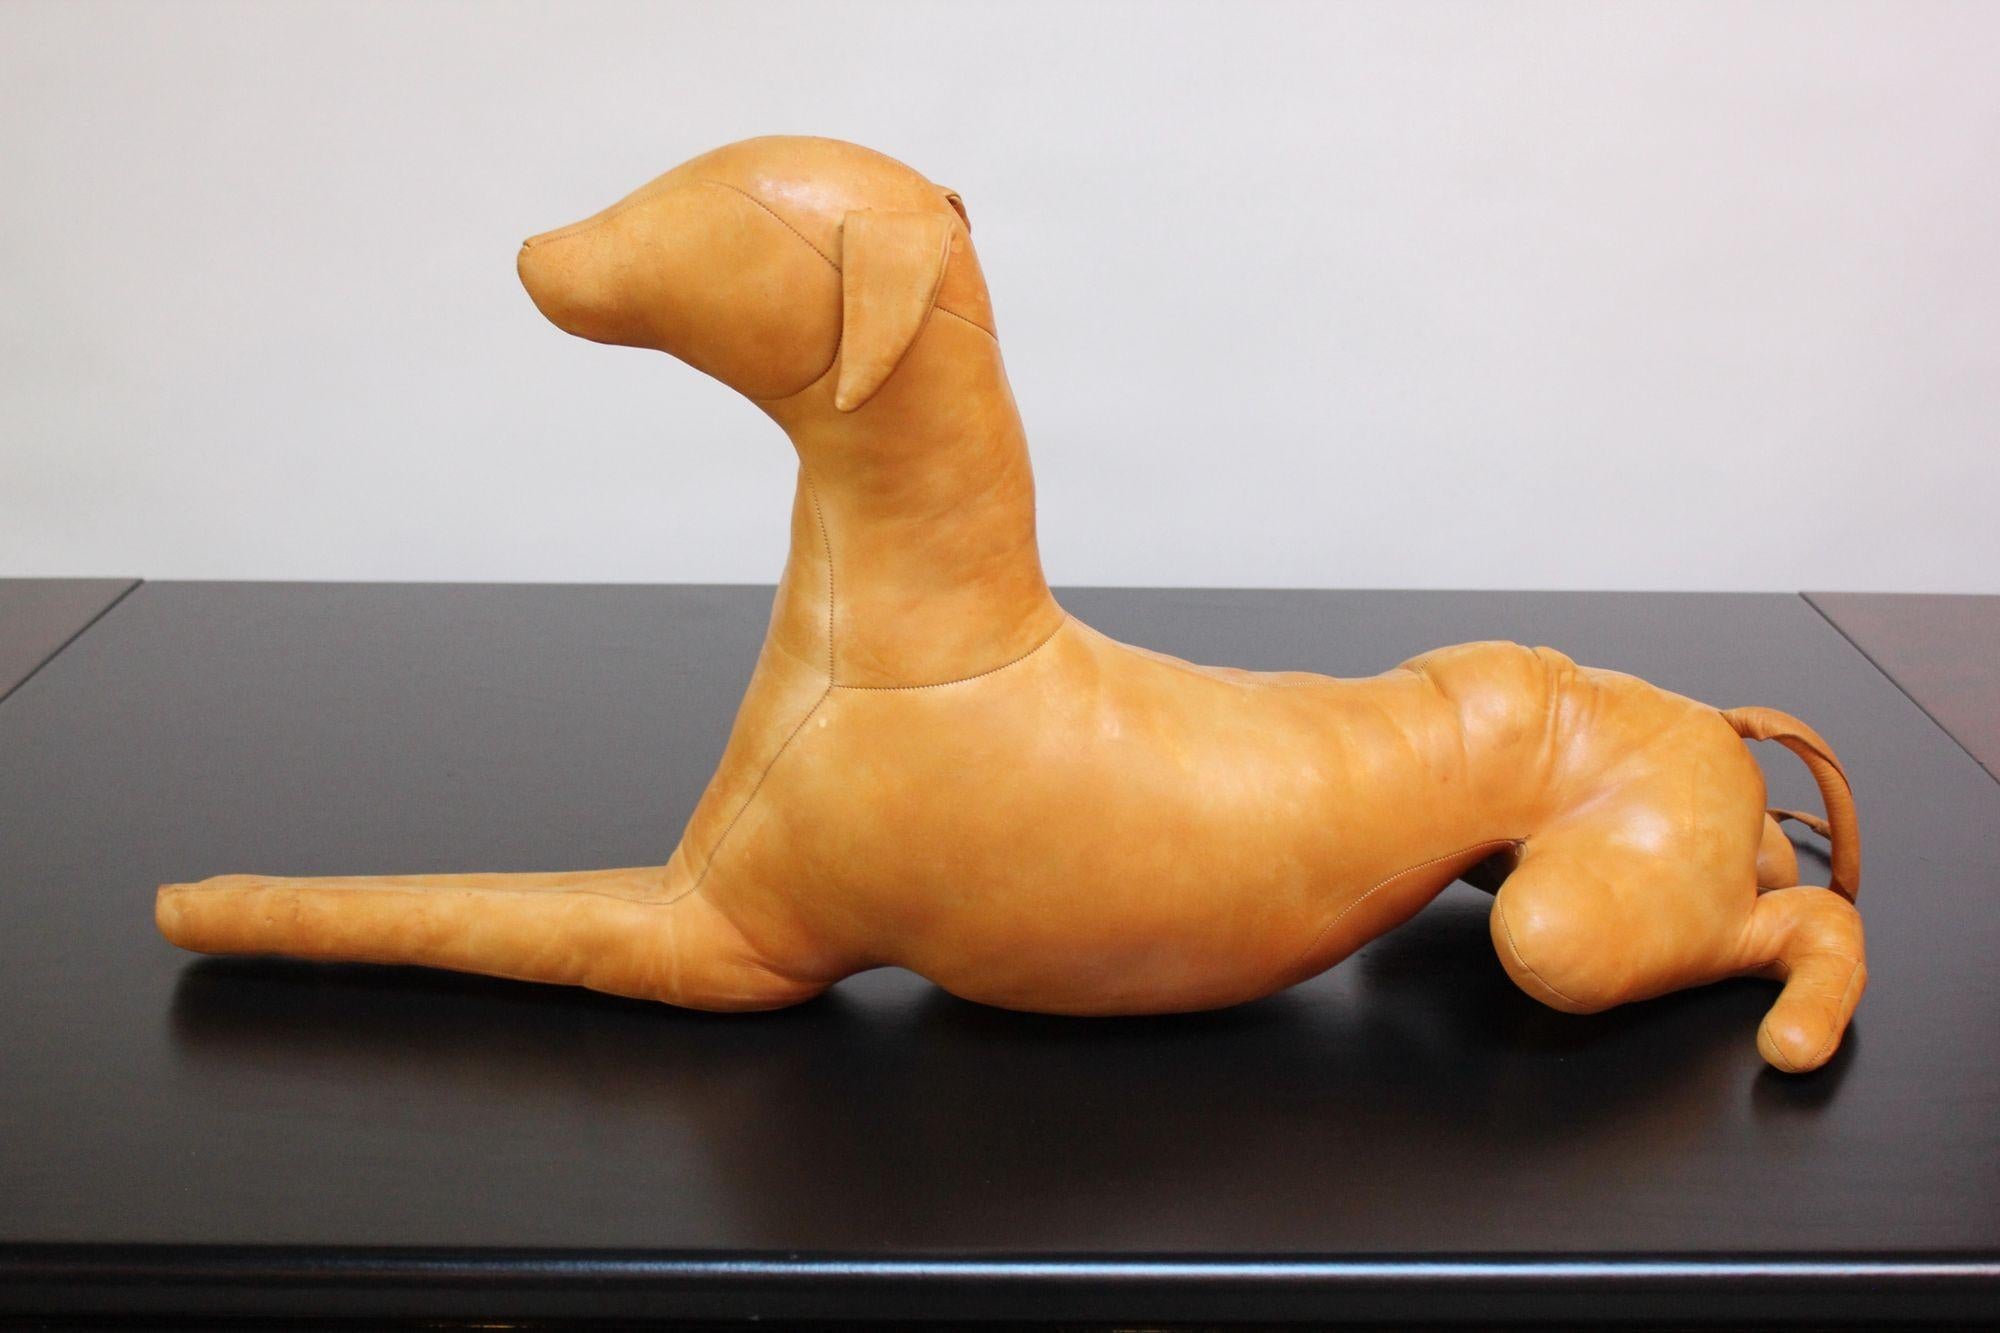 Buttery leather puppy dog sculpture in the Style of Dmitri Omersa (ca. 1980s, USA).
Very good, vintage condition with light patina/normal age consistent with age/use (due to the handmade construction and age, the dog does not lie flat and instead